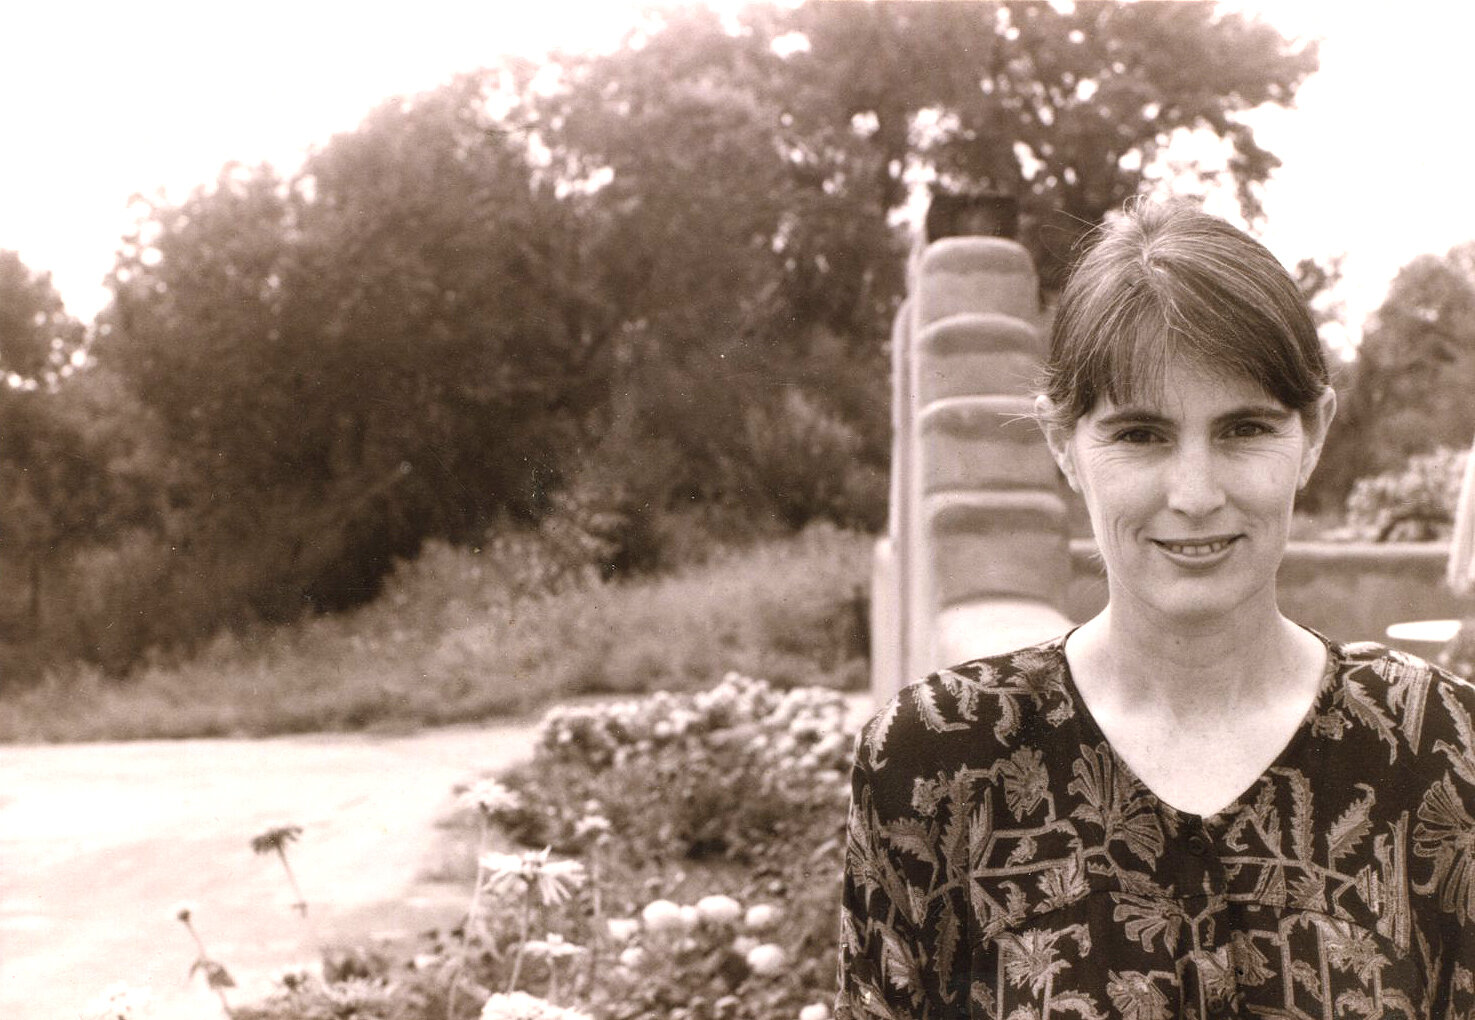 Deborah in 1990, the year The Savory Way was published.